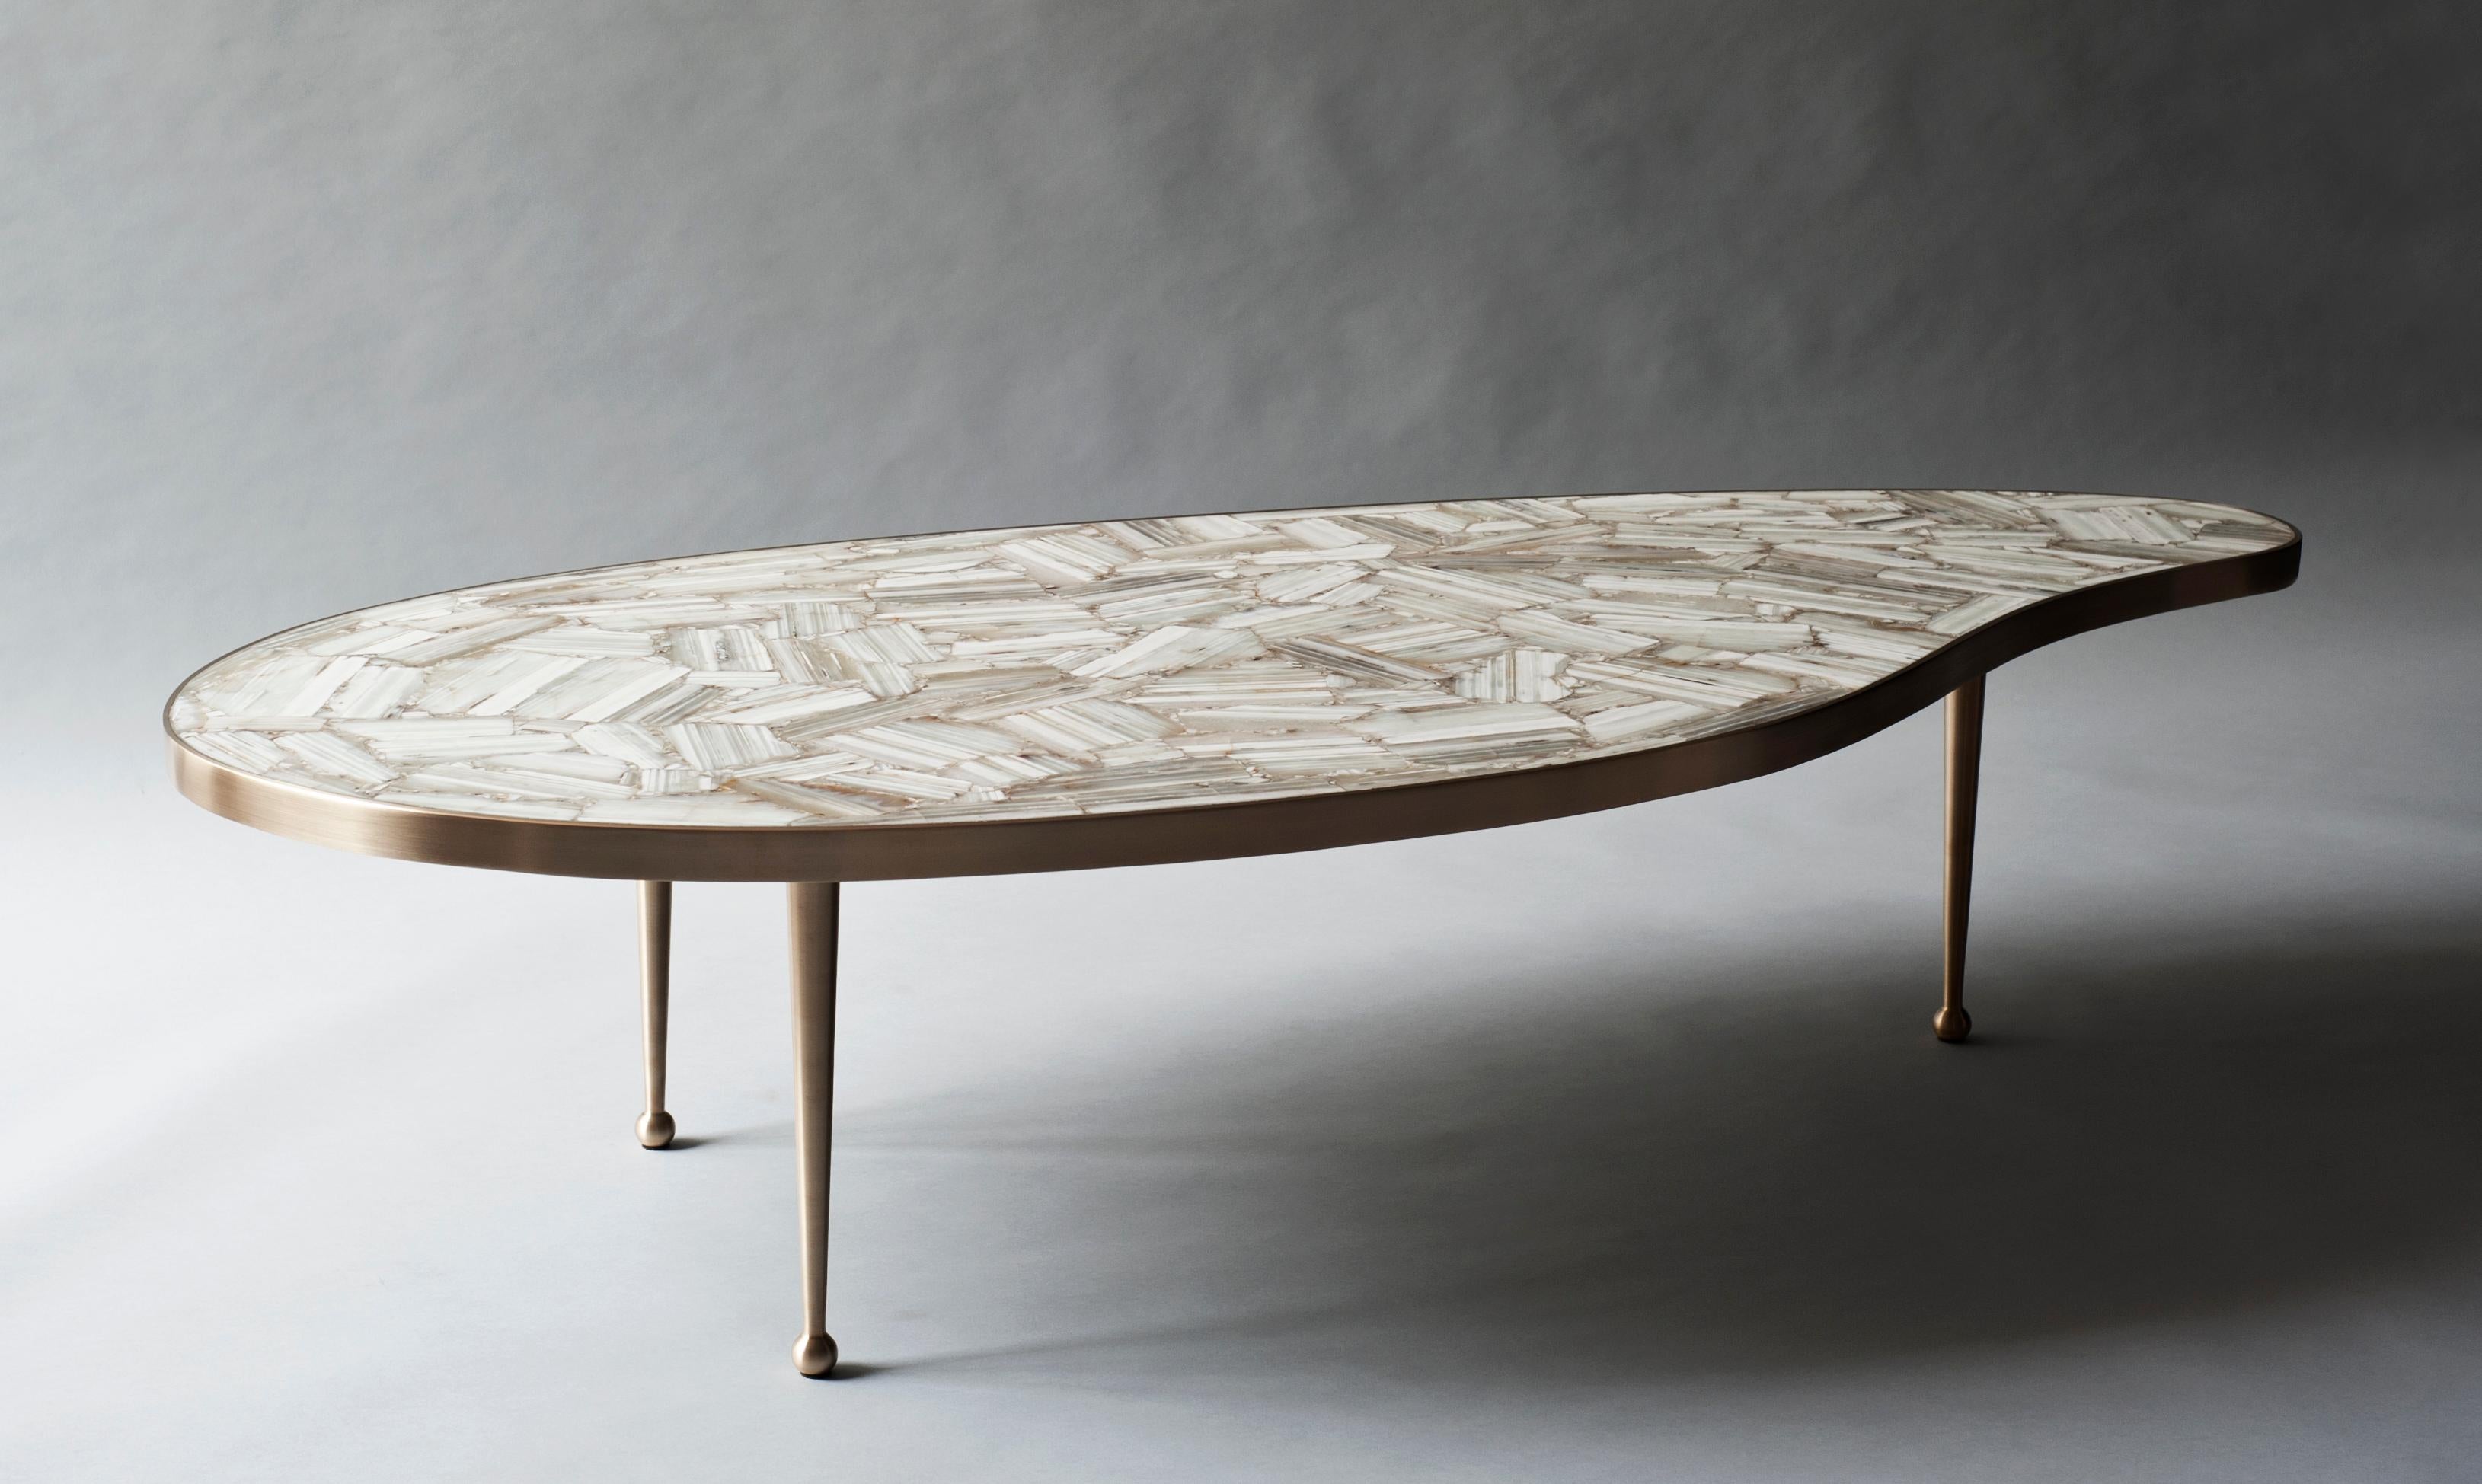 Lola coffee table by DeMuro Das
Dimensions: W 150 x D 71.5 x H 36.2 cm
Materials: agate (banded white) - polished (natural)
 Solid brass (Satin)

DeMuro Das is an international design firm and the aesthetic and cultural coalescence of its